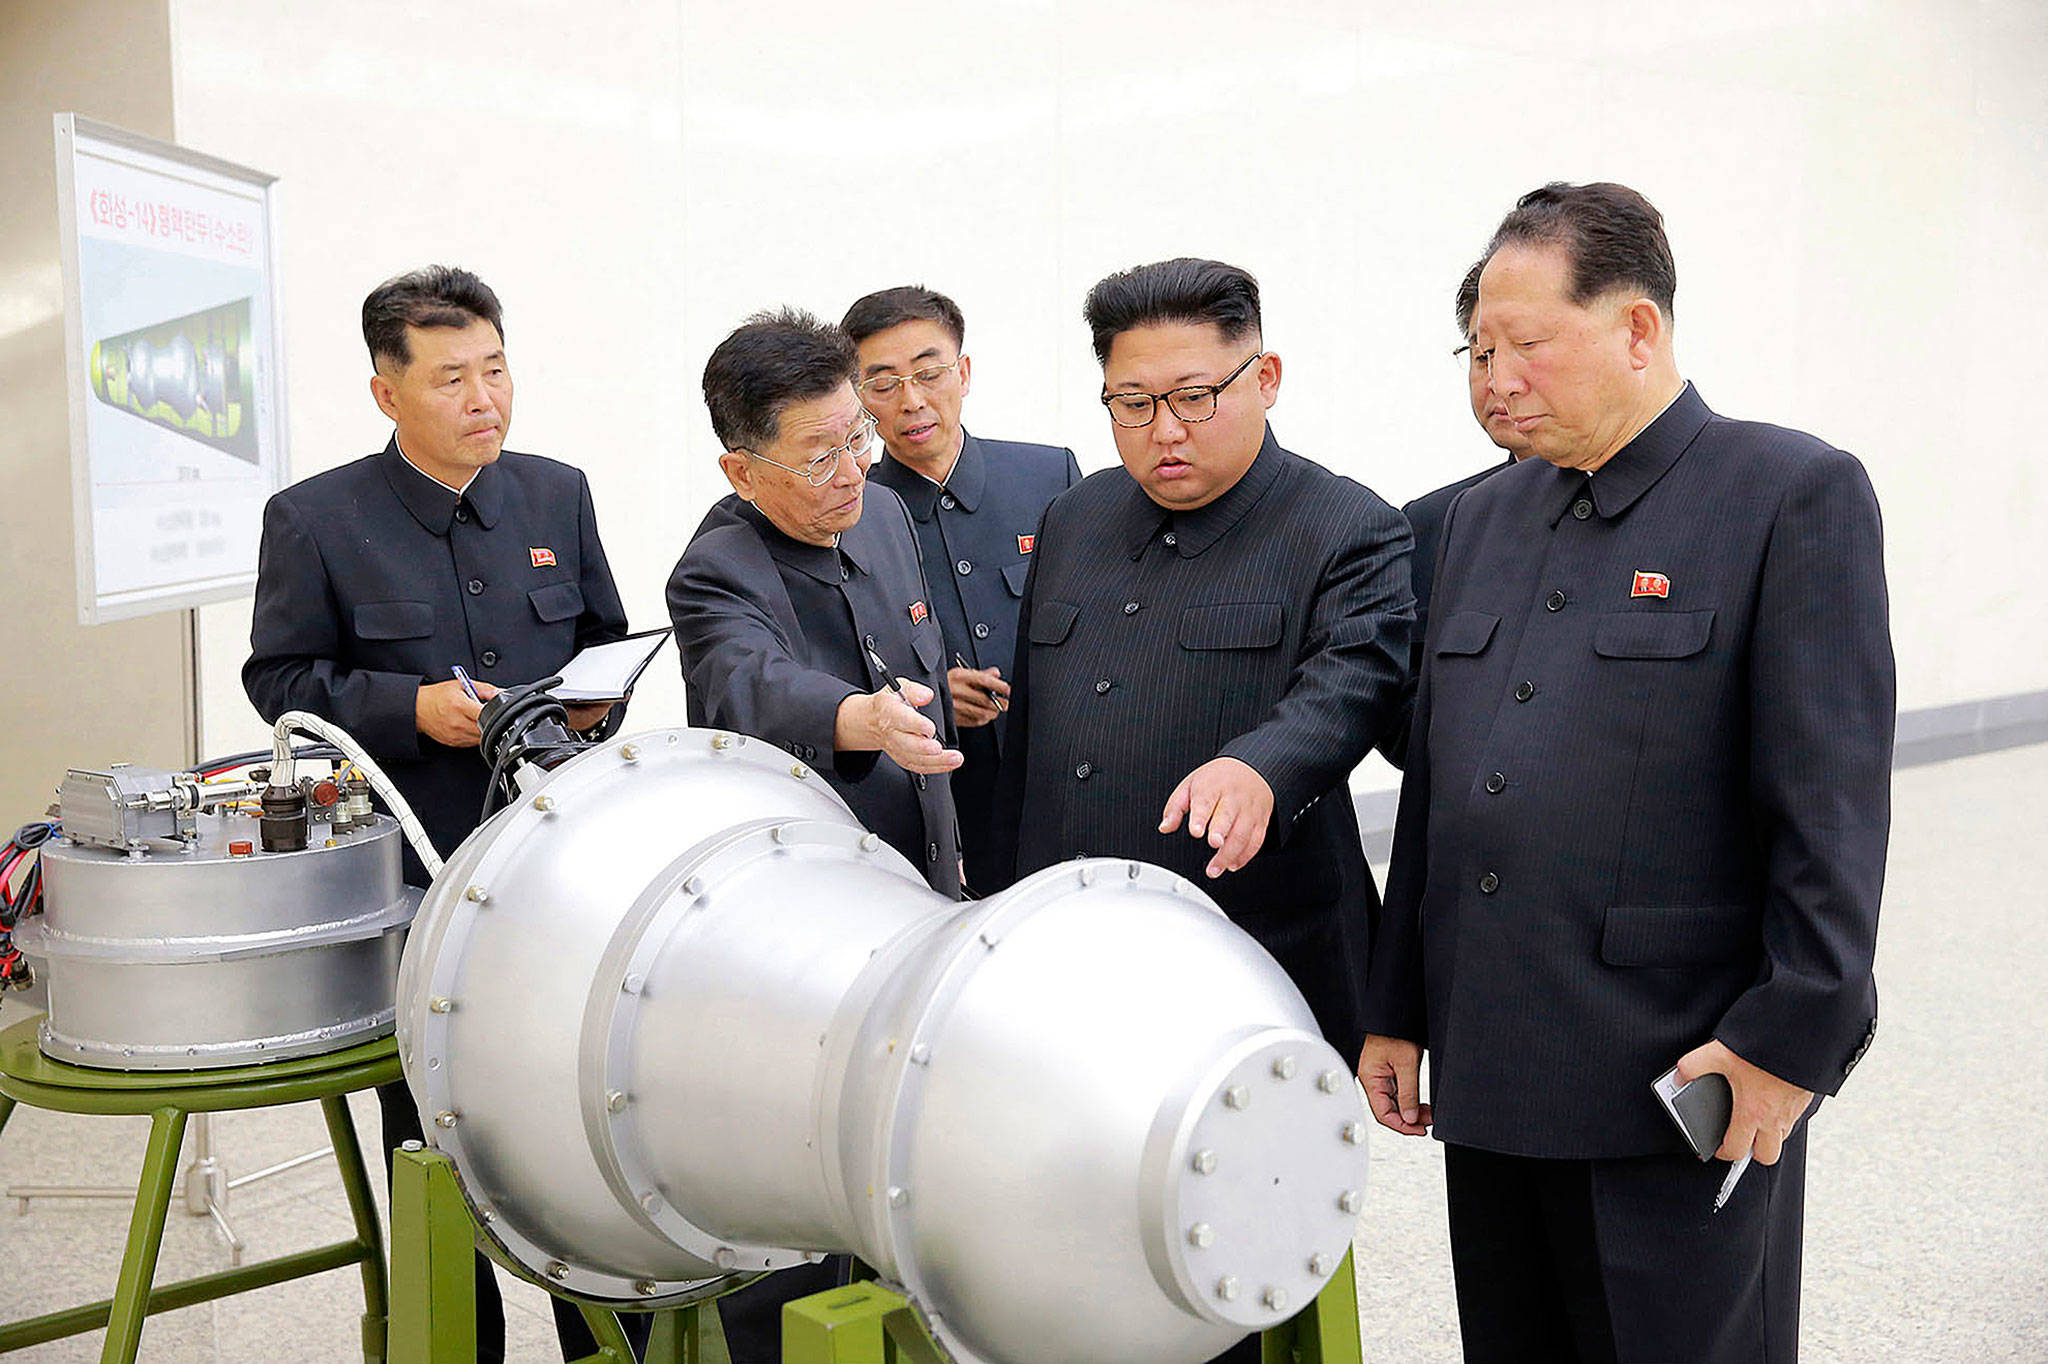 North Korea 'helping Syria chemical weapons factories'